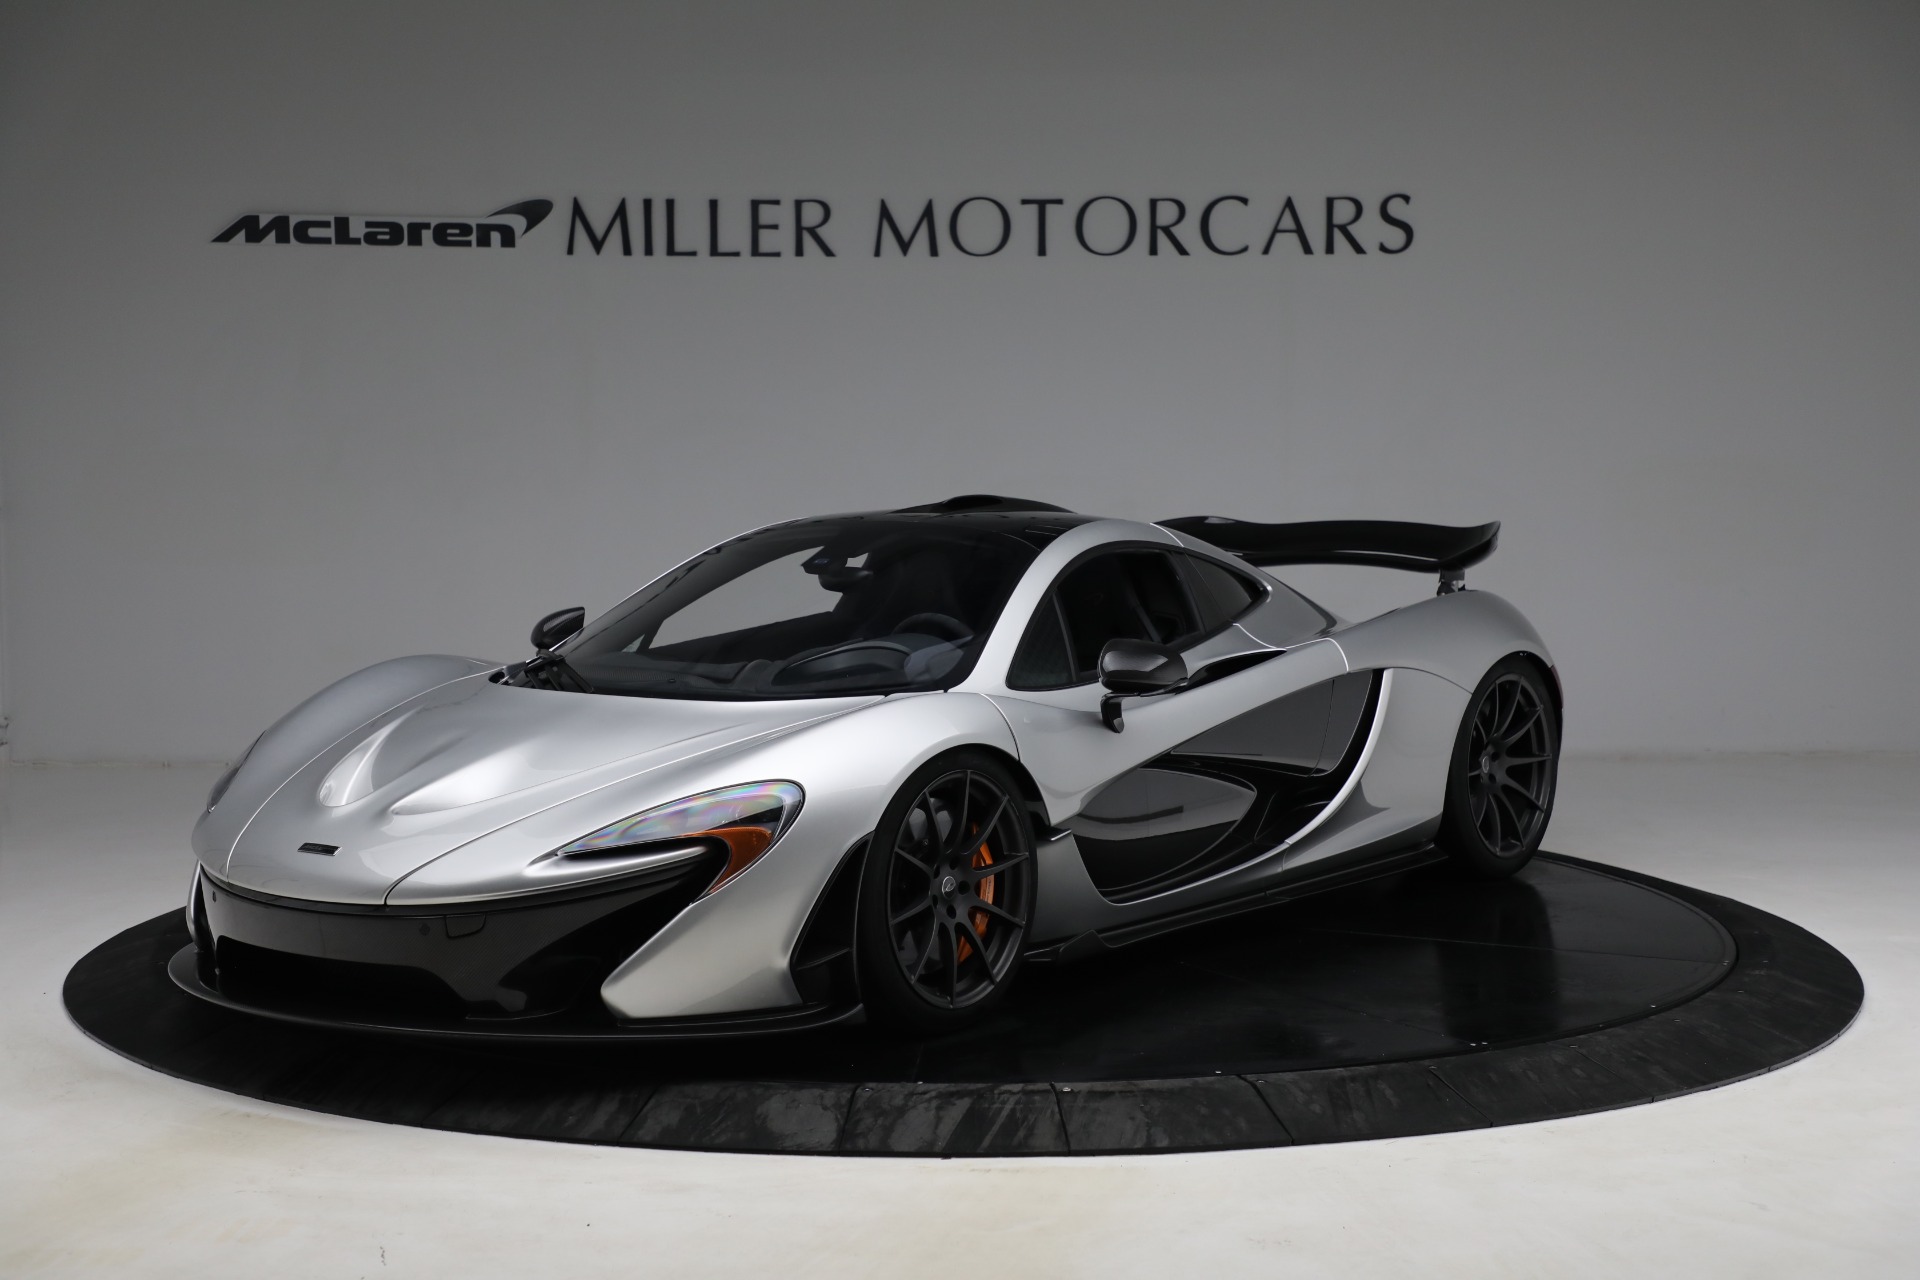 Used 2015 McLaren P1 for sale $1,795,000 at Aston Martin of Greenwich in Greenwich CT 06830 1